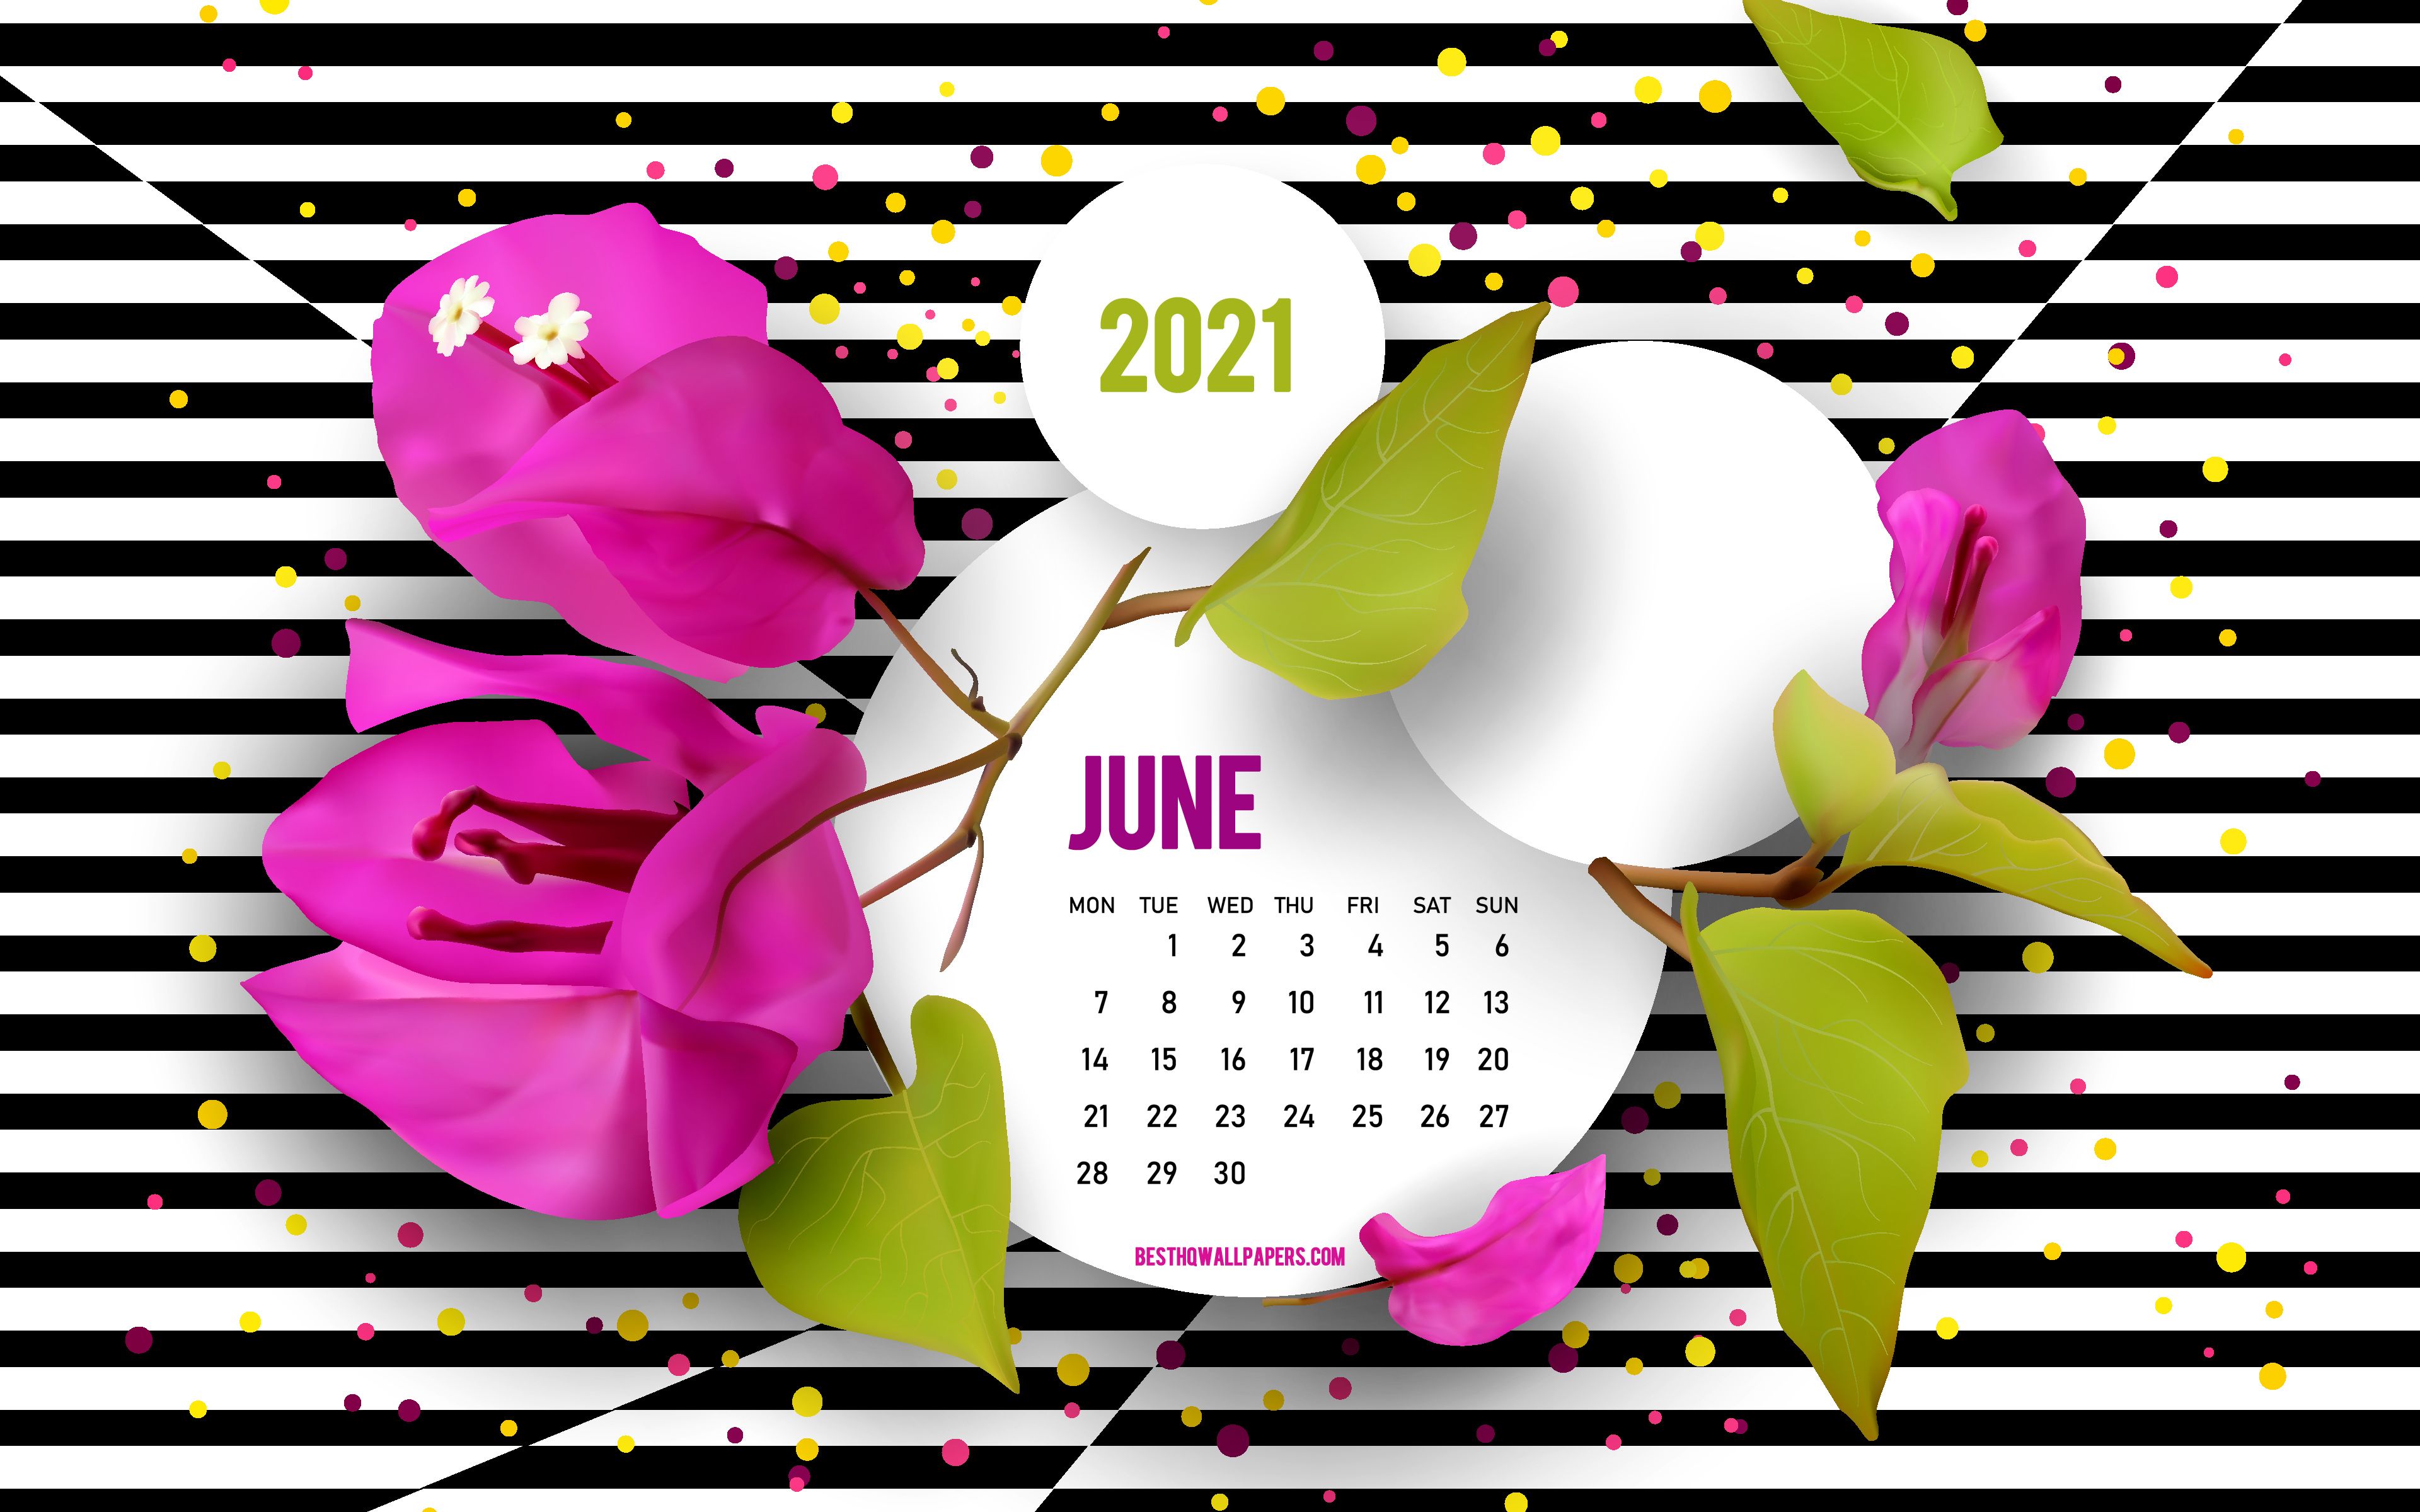 Download wallpaper 2021 June Calendar, background with flowers, creative art, June, 2021 summer calendars, black and white striped background, June 2021 Calendar, purple flowers for desktop with resolution 3840x2400. High Quality HD picture wallpaper